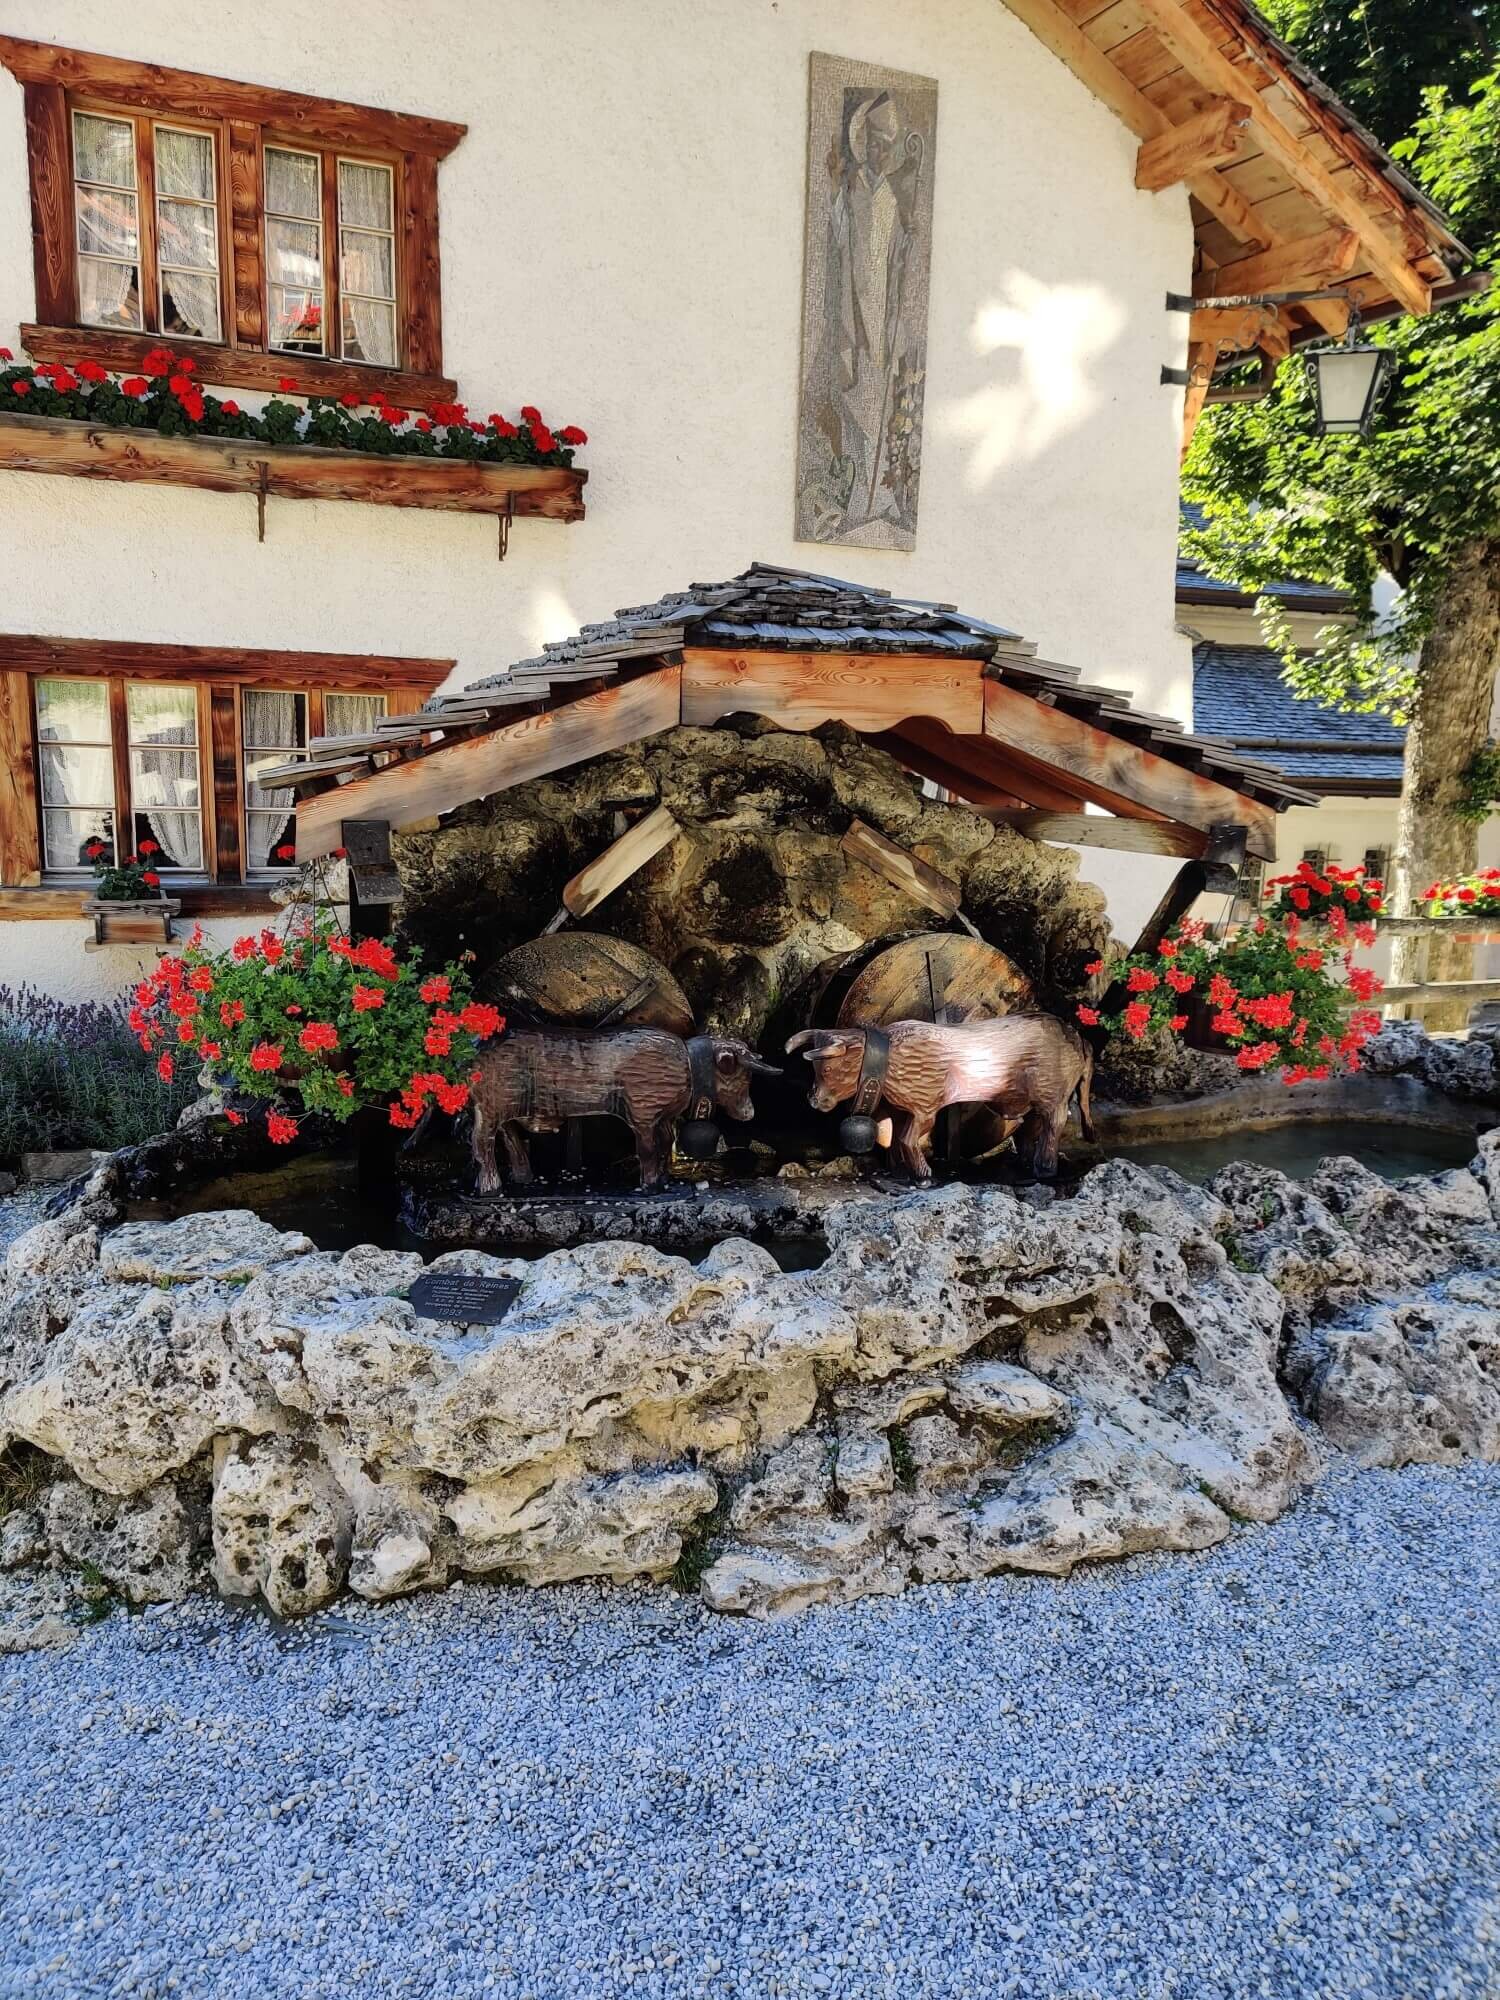 Wood carvings in the village of Grimentz